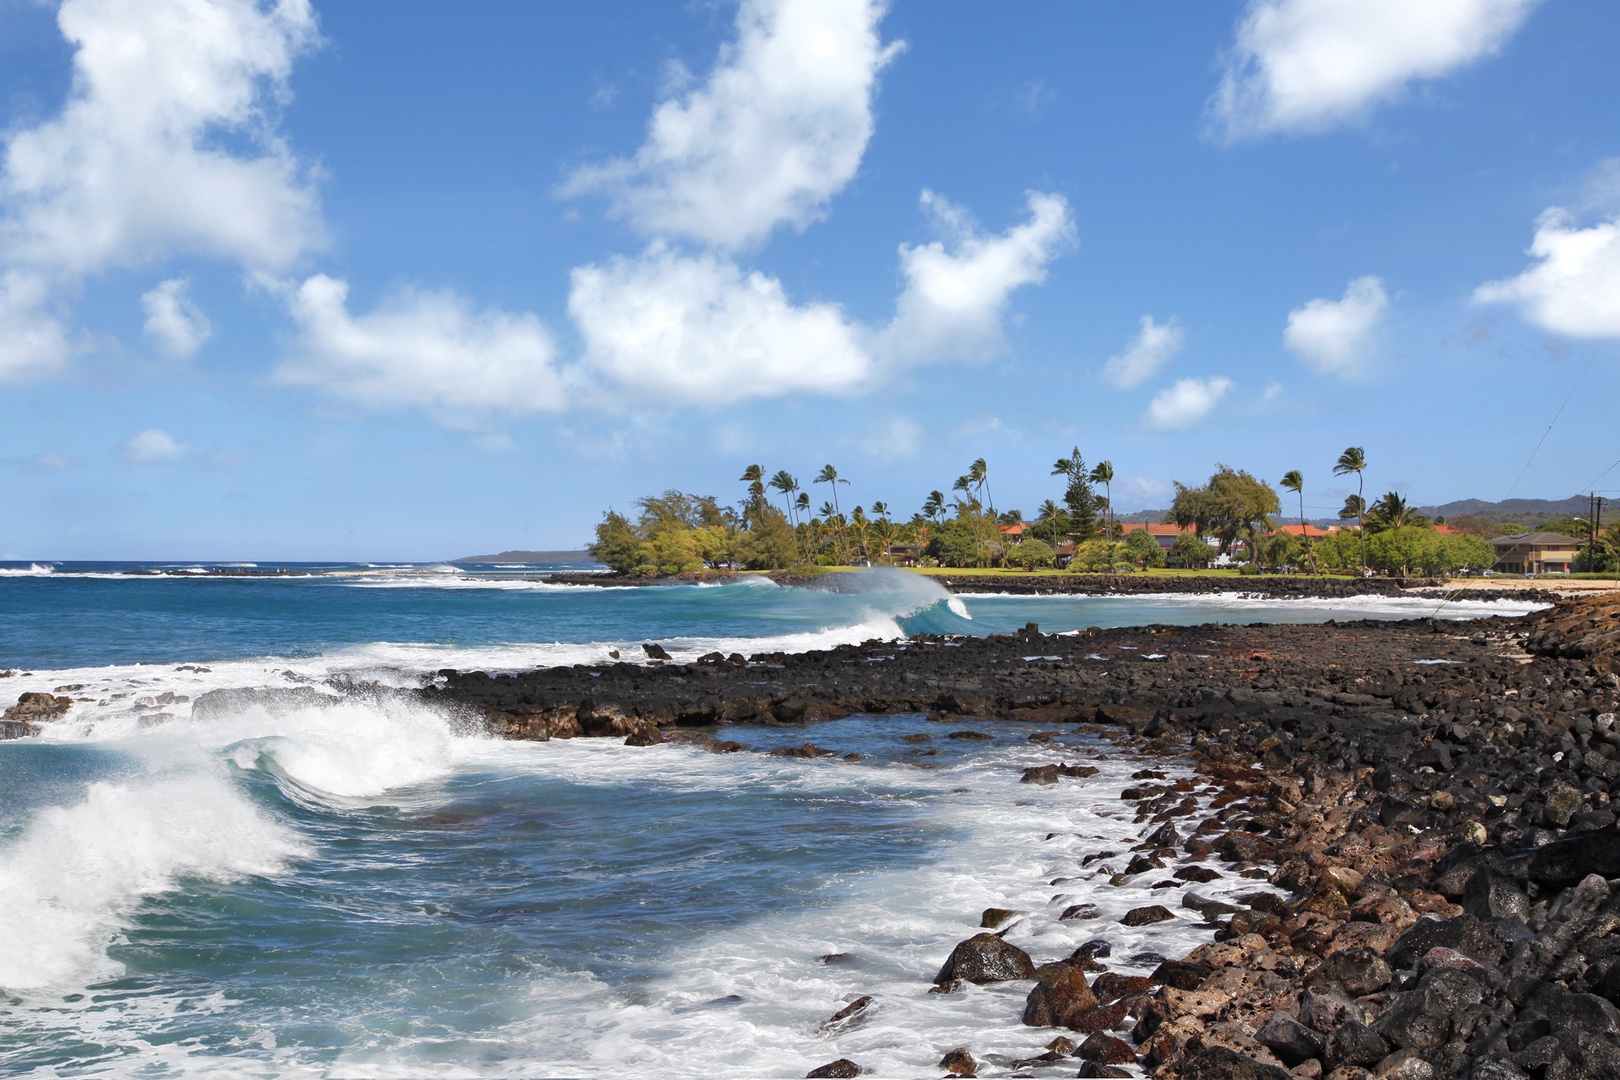 Koloa Vacation Rentals, Hale Pakika at Kukui'ula - Brennecke's beach at Poipu is a great place to explore.